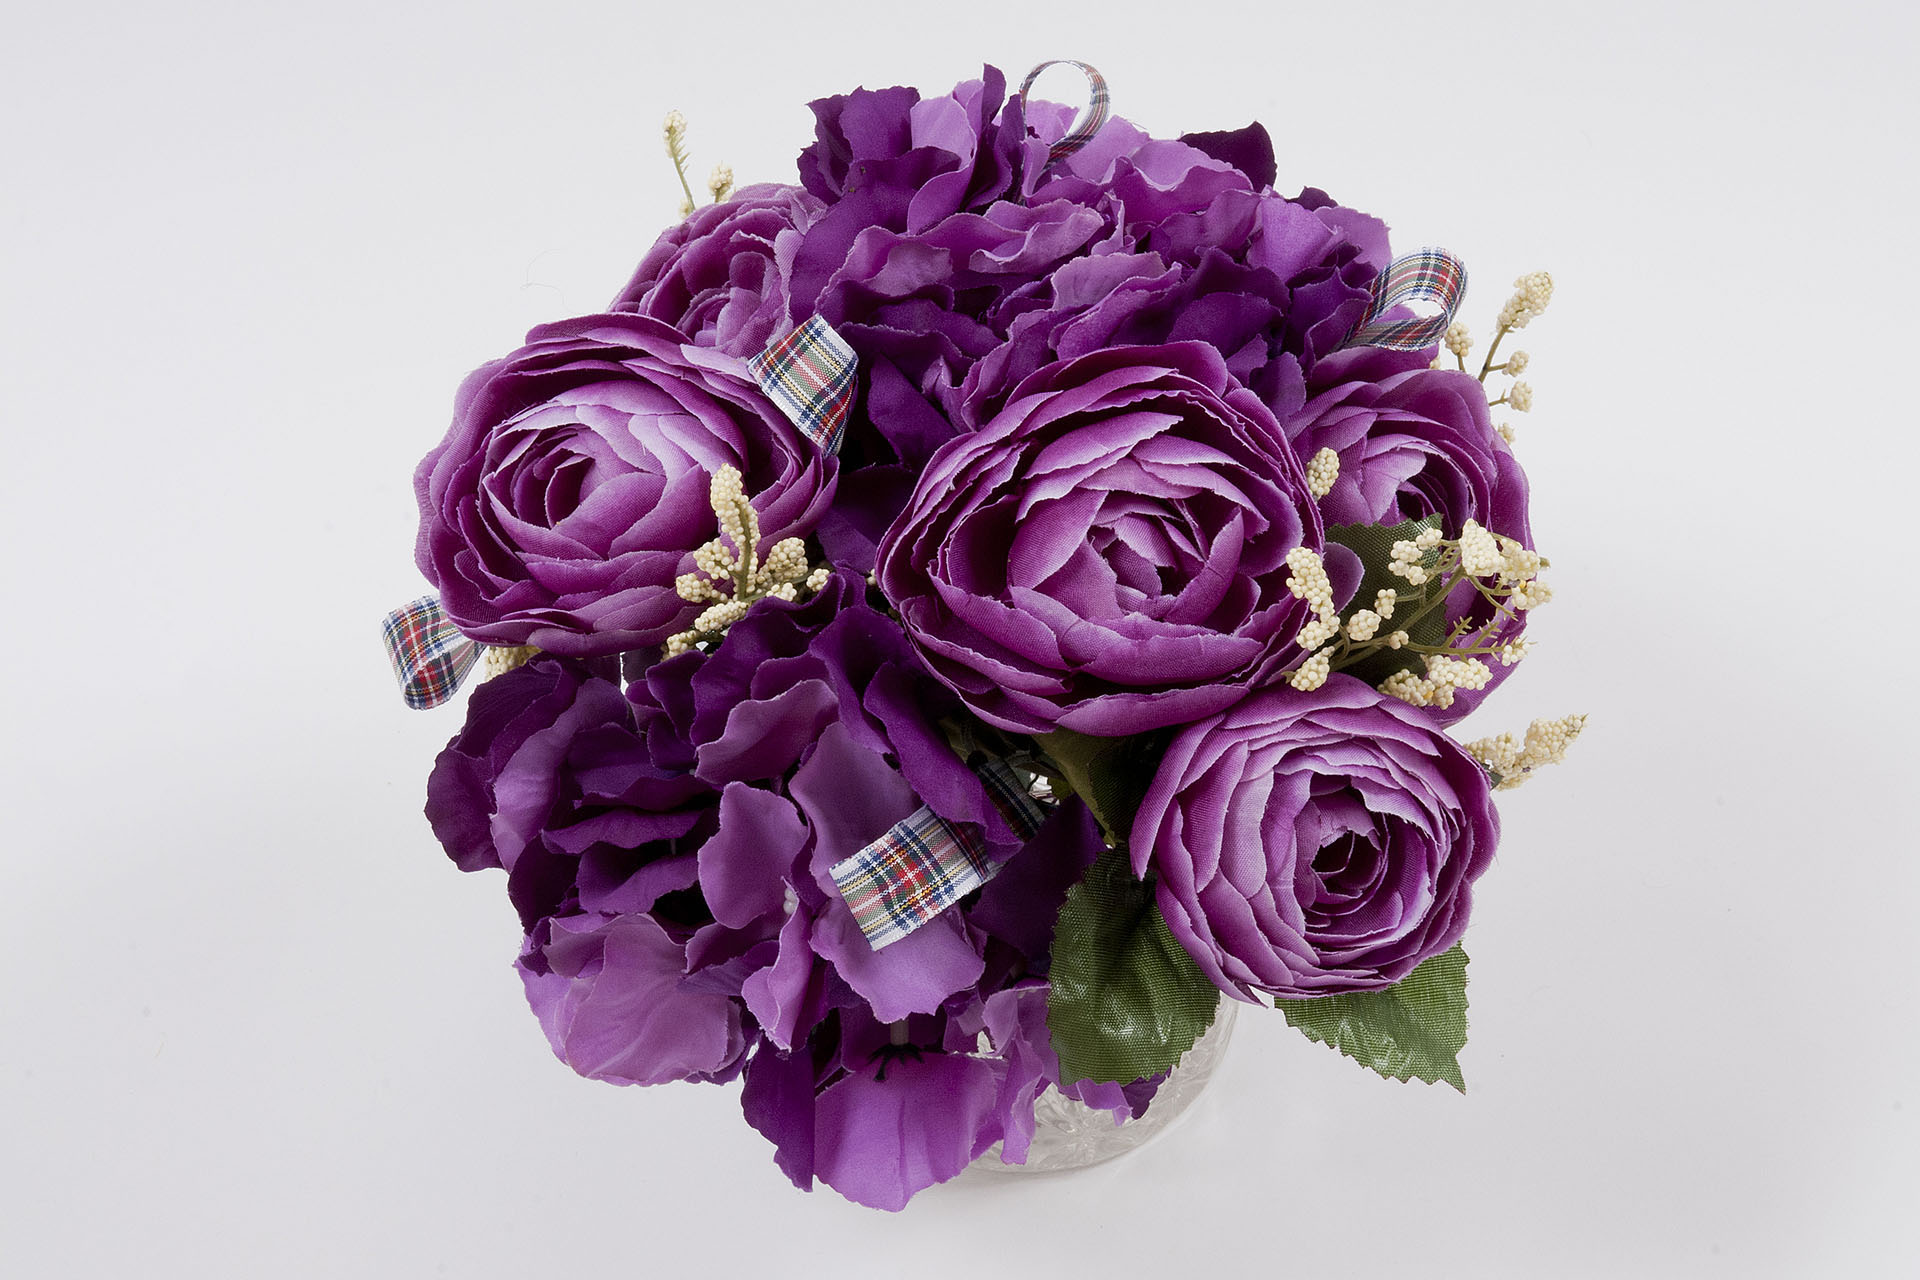 Gallery of Silk Flower Arrangements for Weddings and Gifts